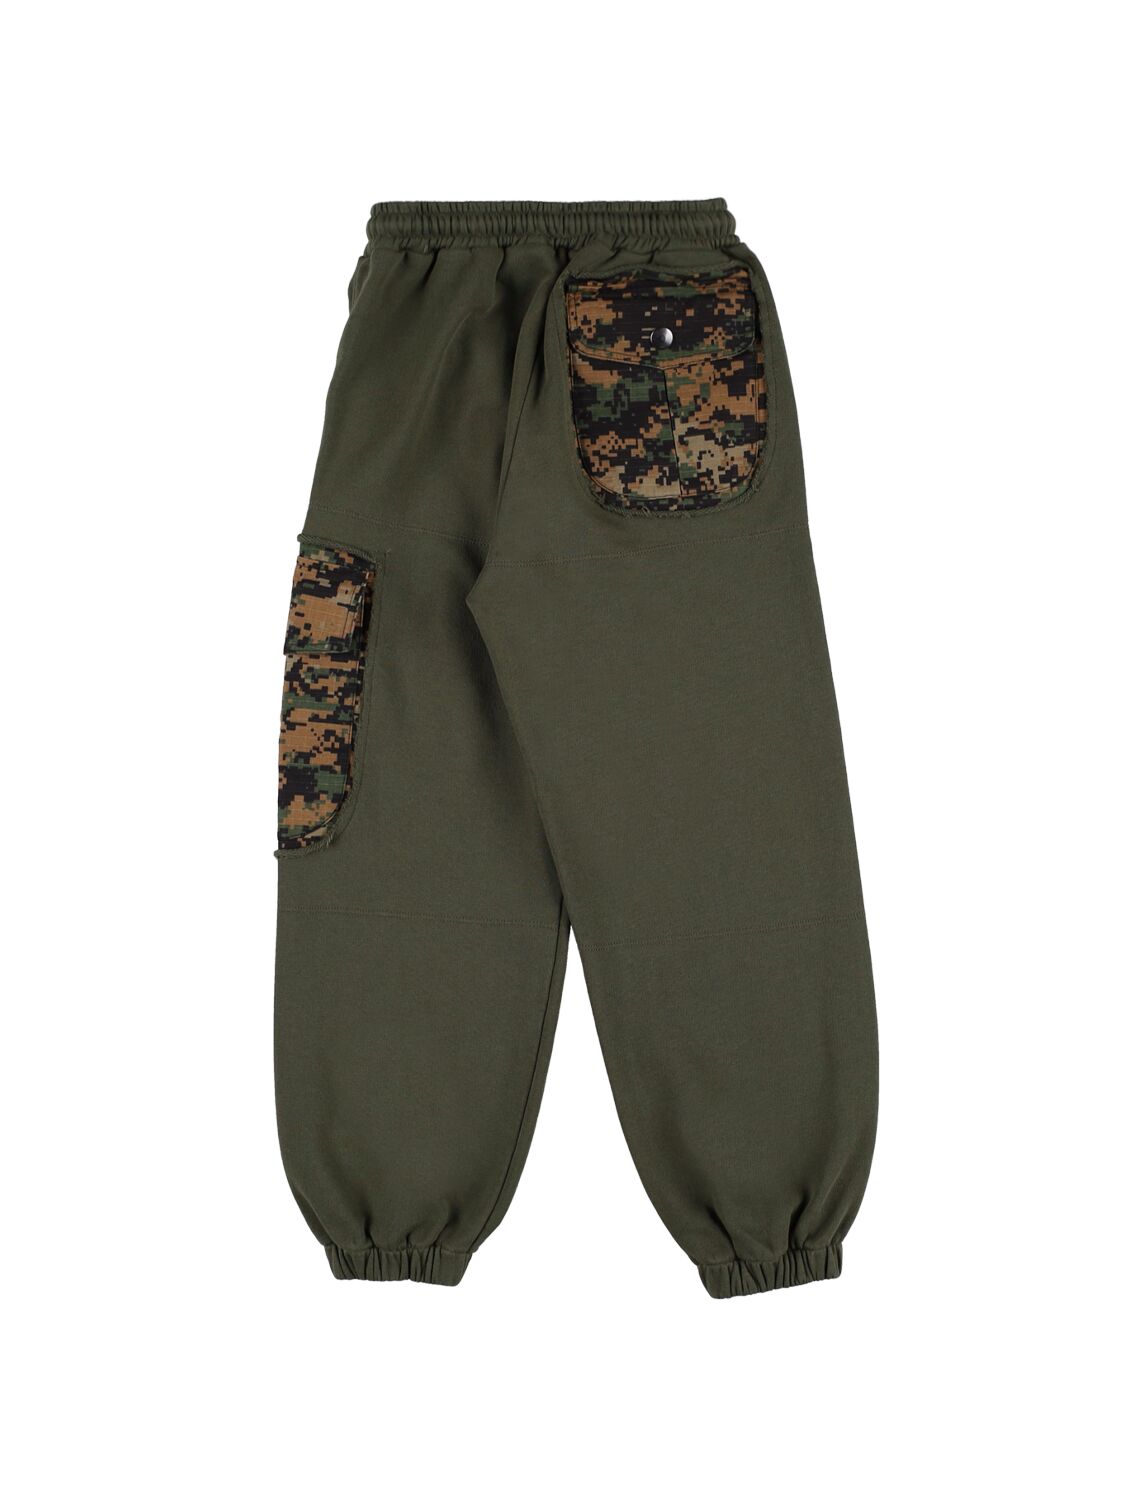 Shop Myar Cotton Sweatpants In Military Green